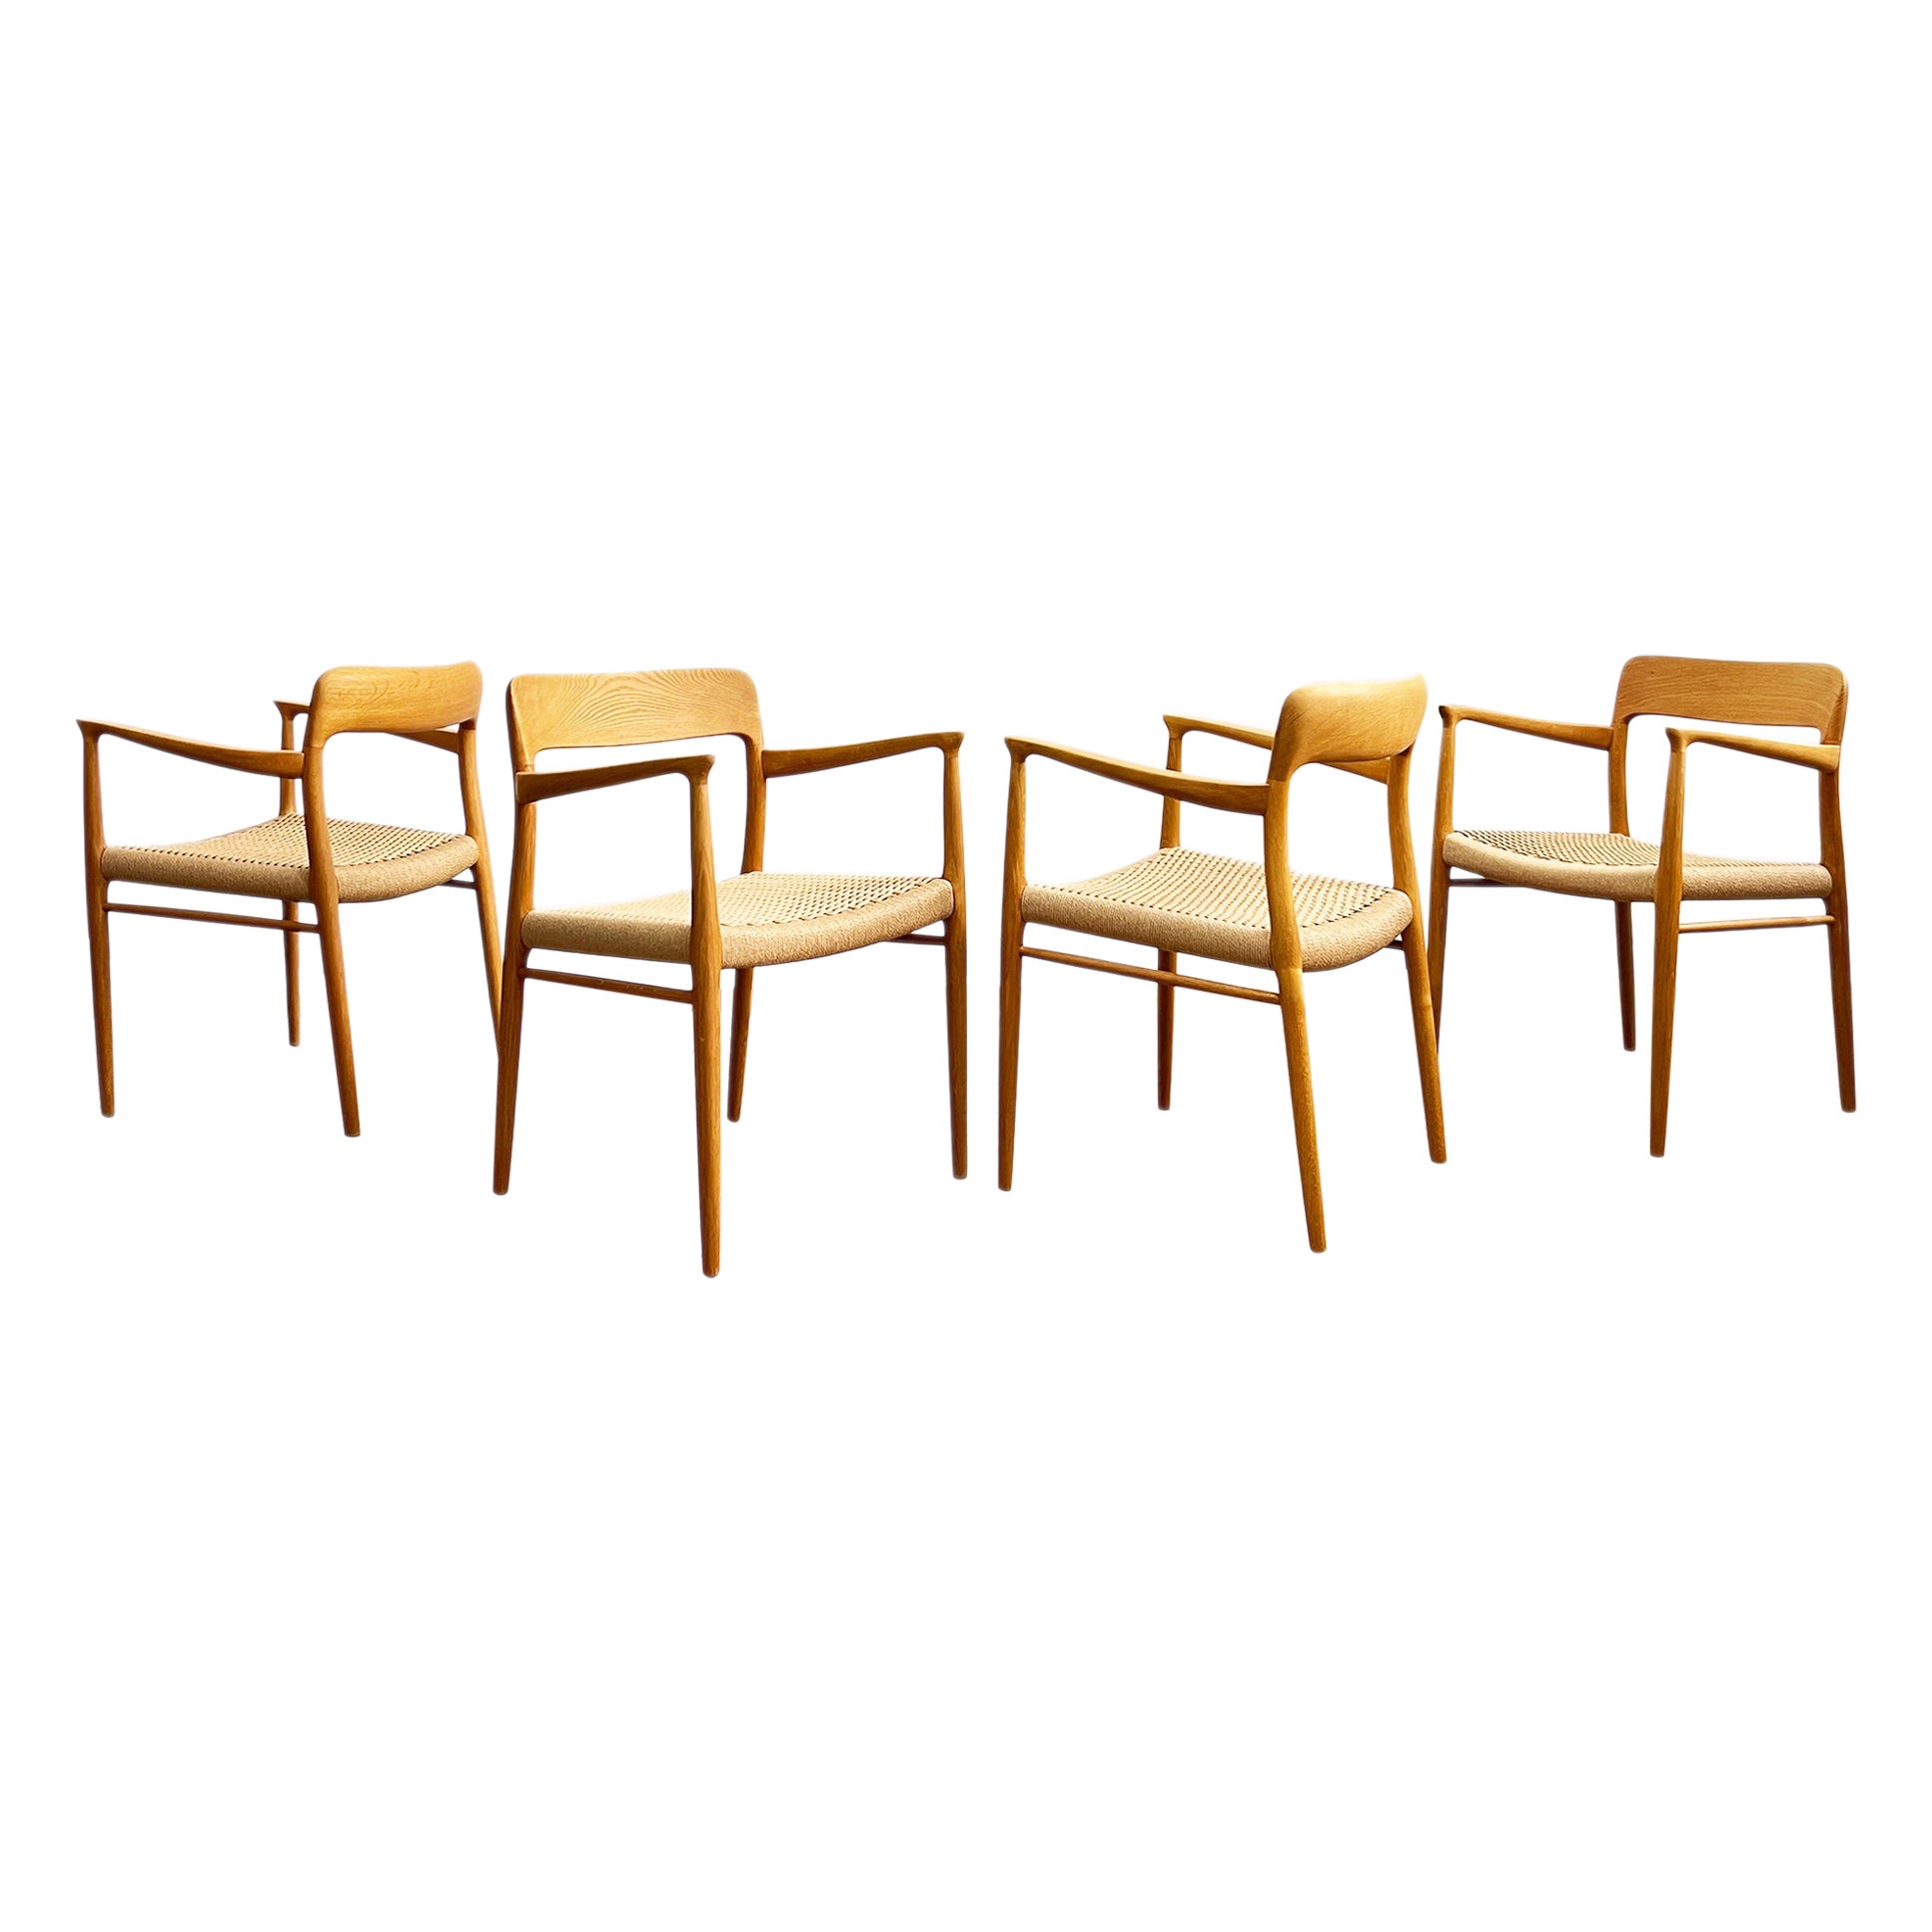 4 Mid-Century Oak Dining Chairs #56 by Niels O. Møller for J. L. Moller